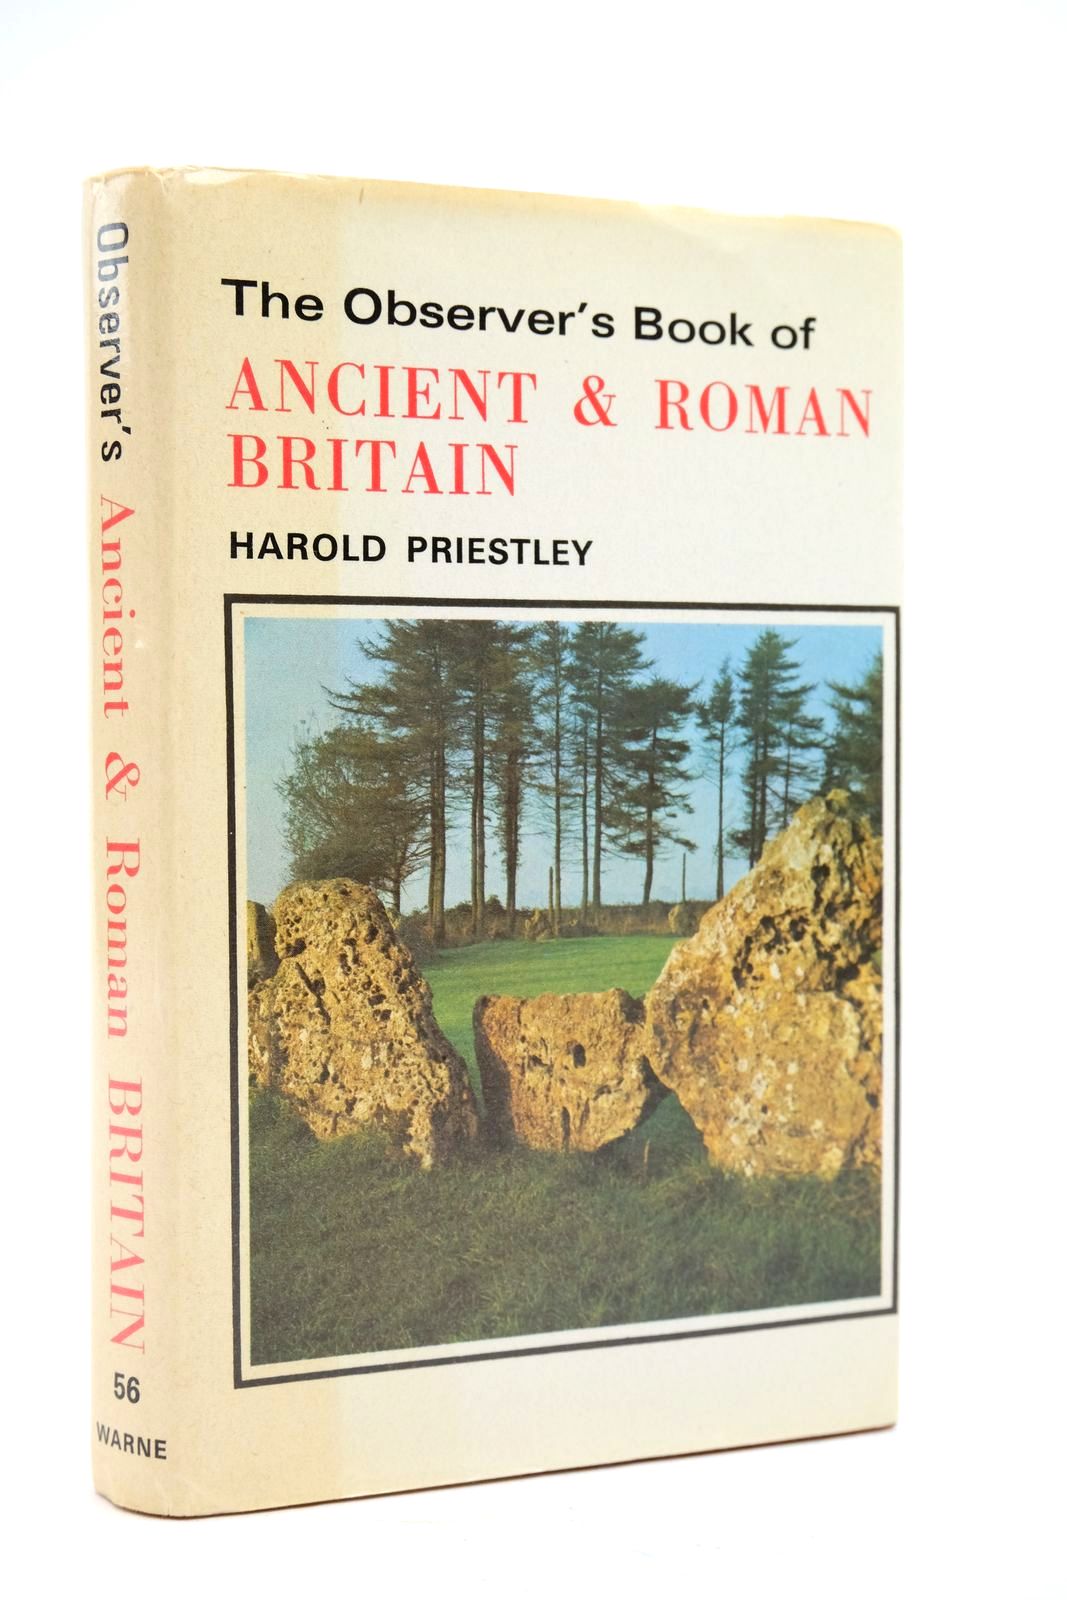 Photo of THE OBSERVER'S BOOK OF ANCIENT AND ROMAN BRITAIN written by Priestley, Harold published by Frederick Warne &amp; Co Ltd. (STOCK CODE: 2140973)  for sale by Stella & Rose's Books